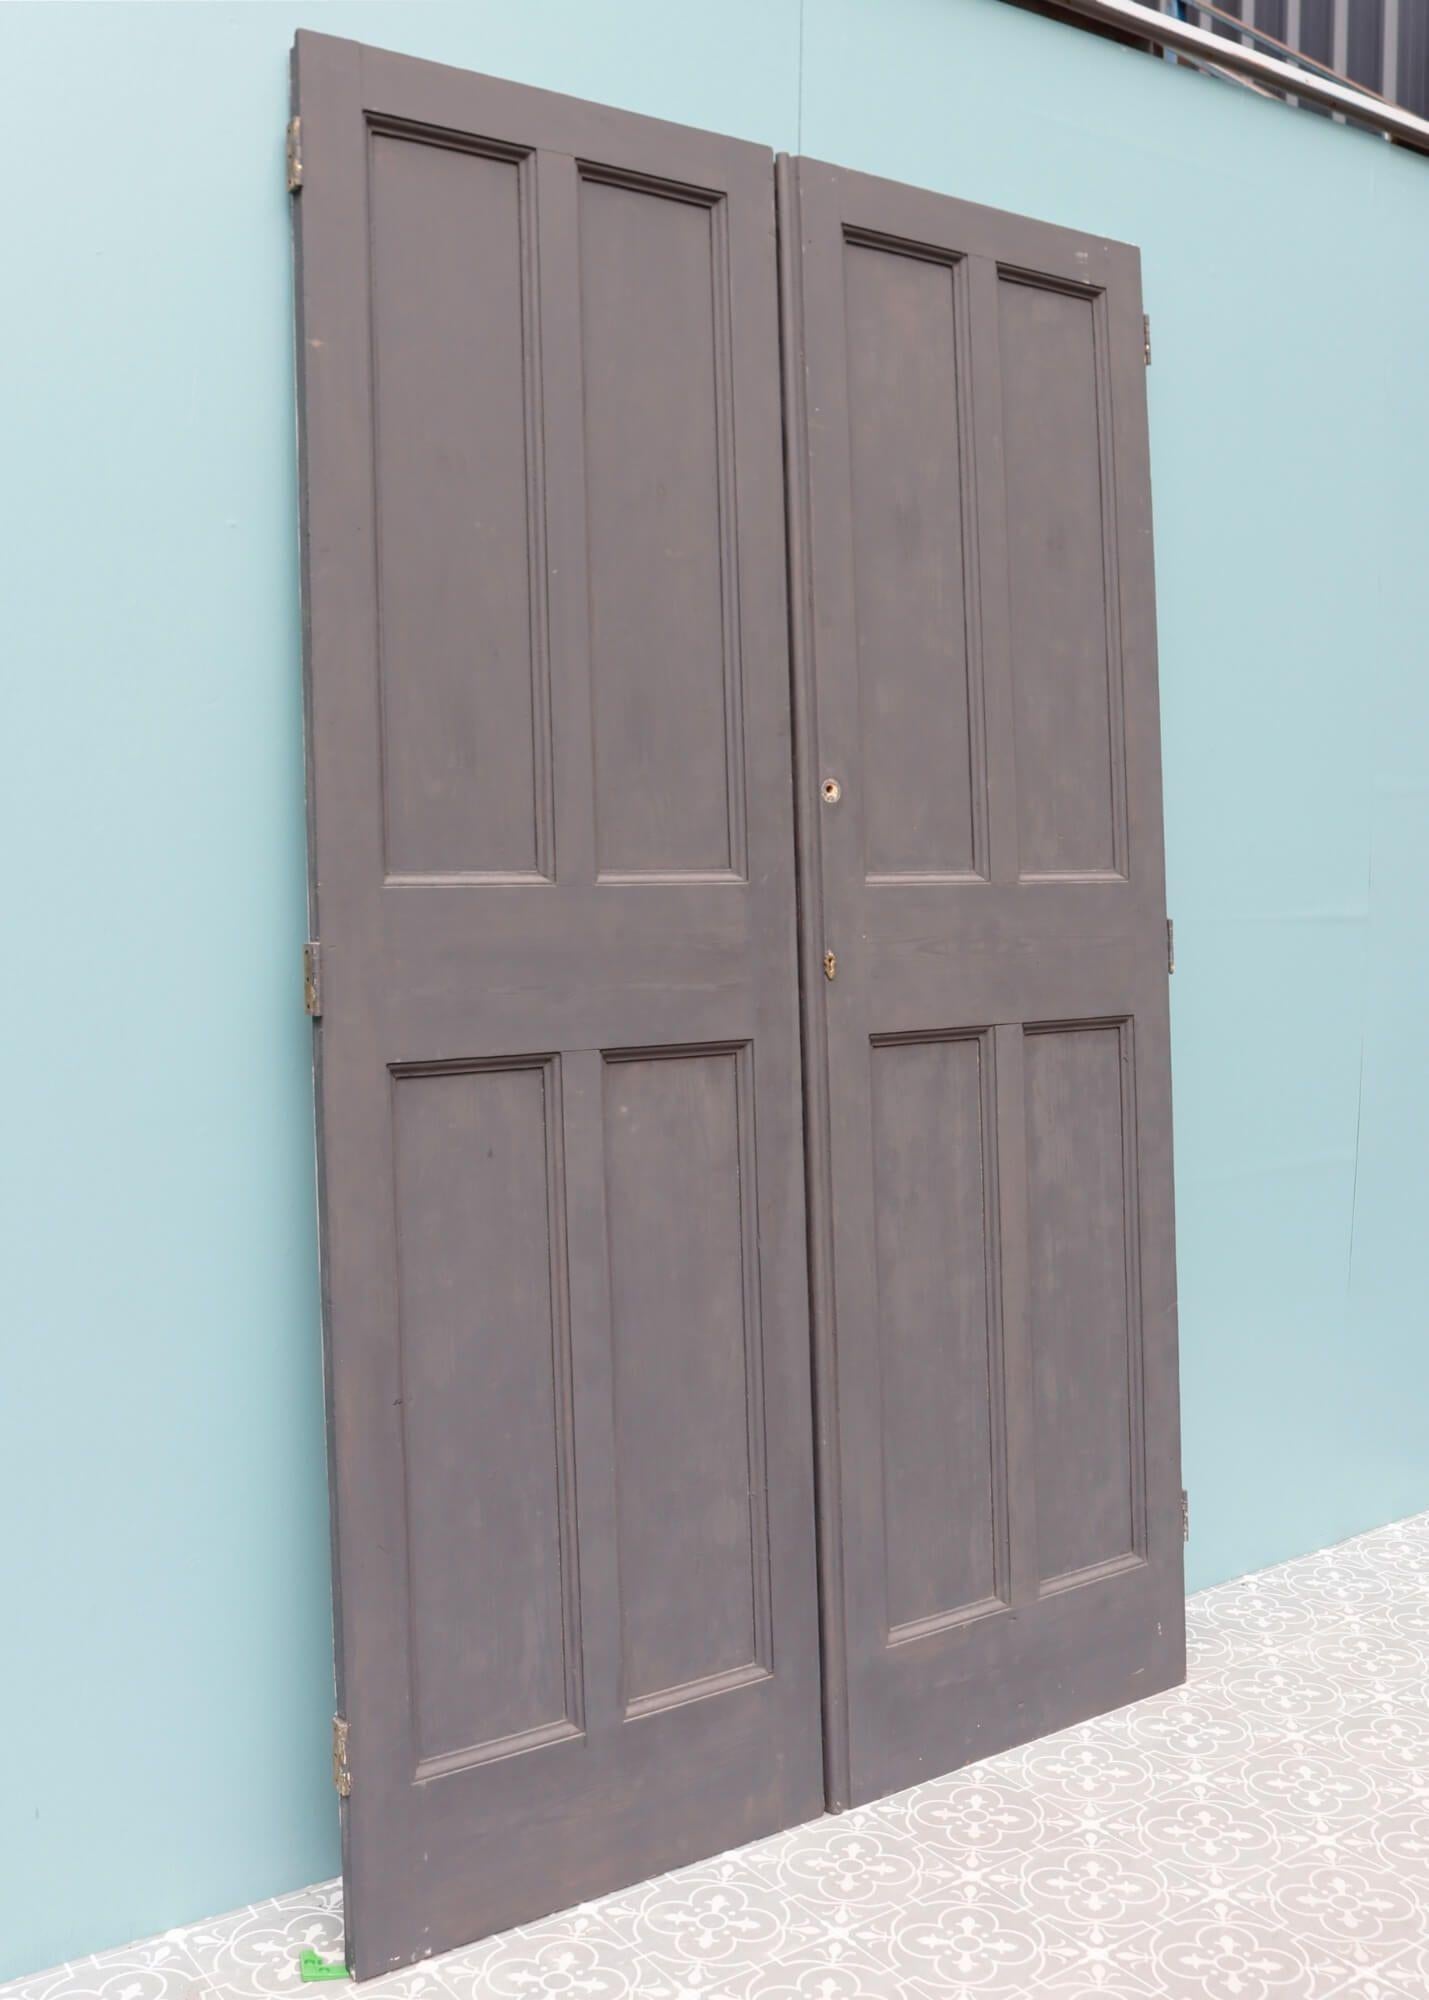 These tall, reclaimed cupboard doors came from a large Victorian townhouse in the idyllic Herefordshire market town of Bromyard. Dating from the 1870s, these handsome pine cupboard doors are dual tone, painted with grey primer to the front and white